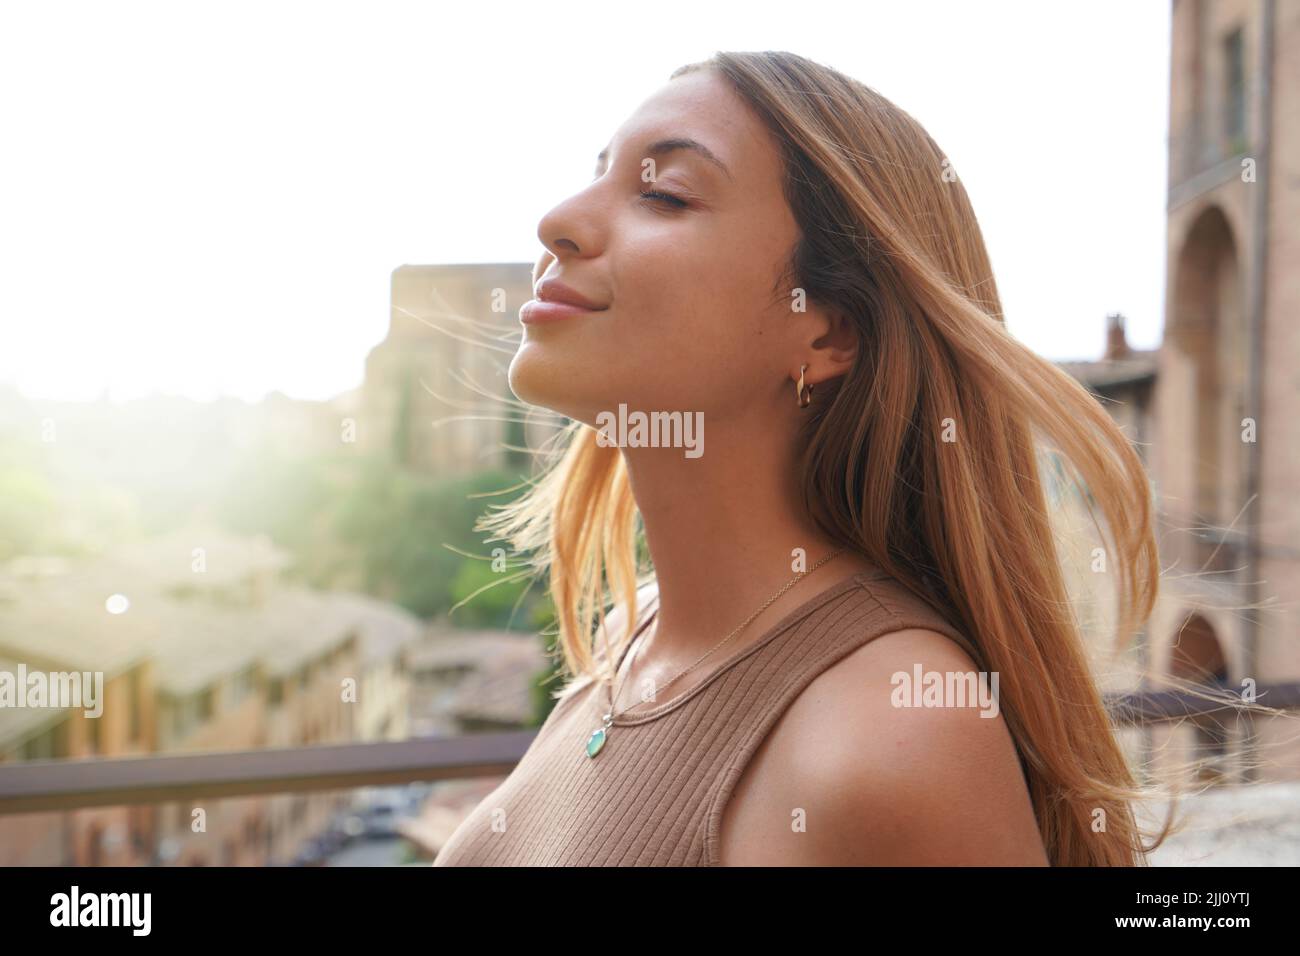 Profile of woman breathe relaxed with closed eyes on sunset. Beauty sunshine girl side portrait. Positive emotion life success mind peace concept. Stock Photo